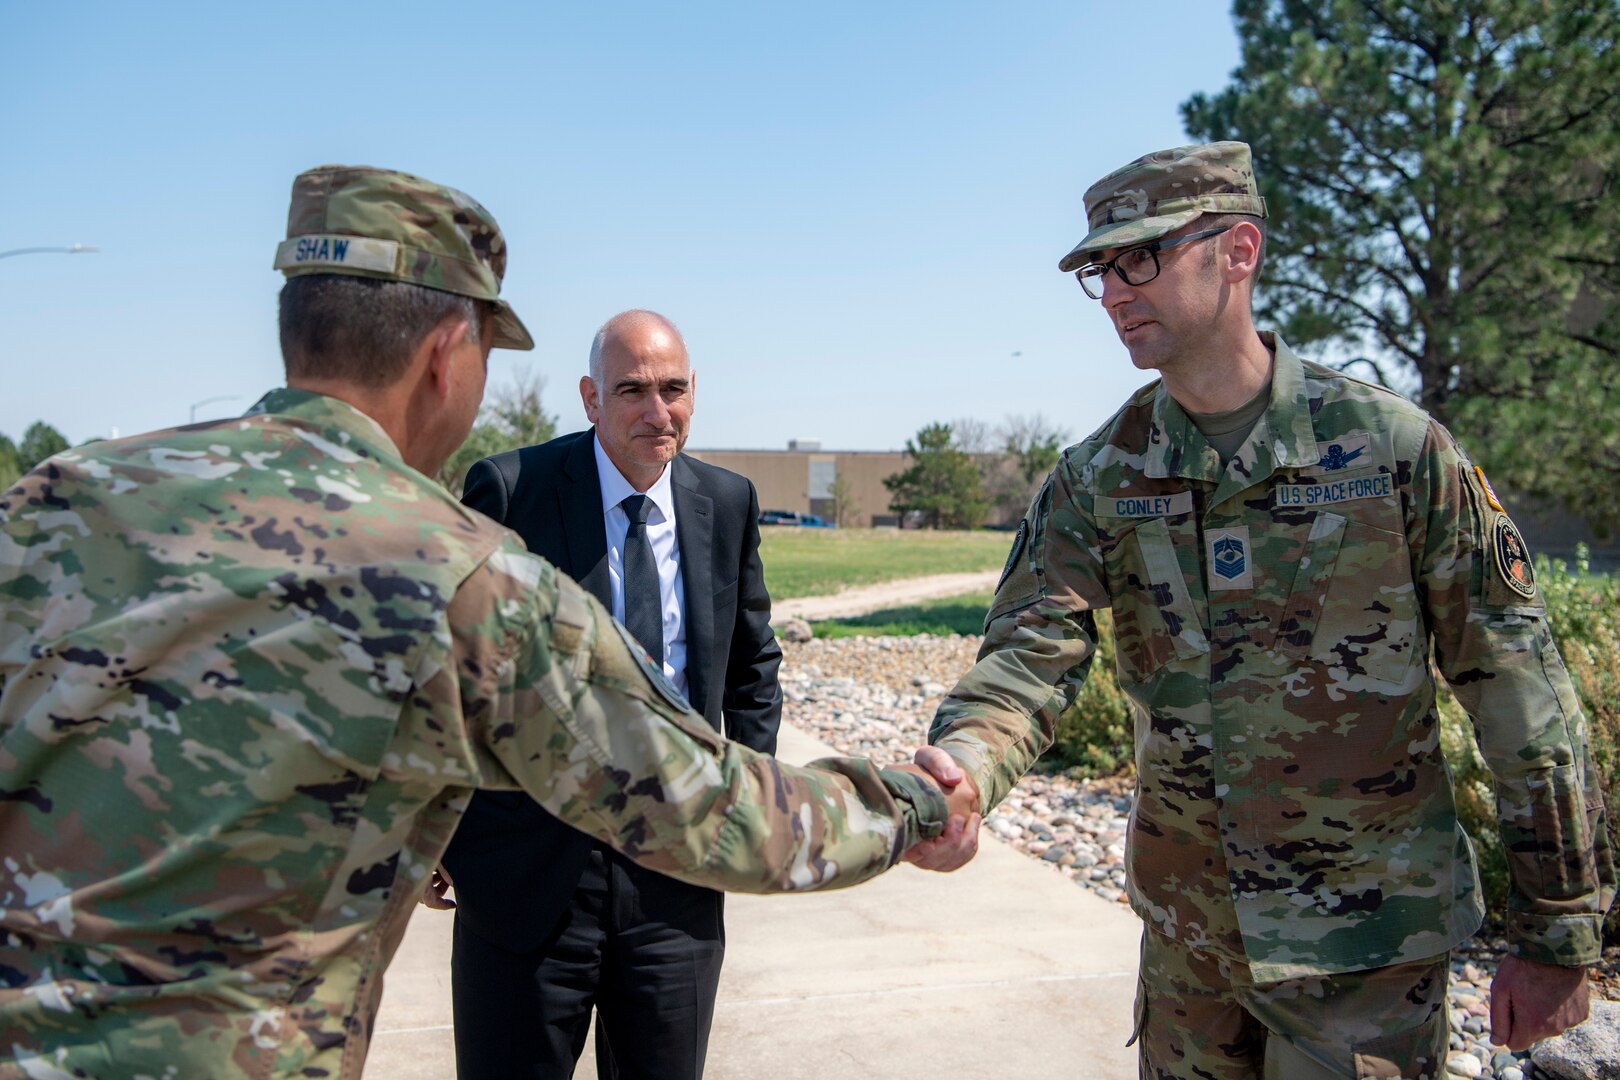 Two military men in uniform shaking hands, man in suit stands behind them